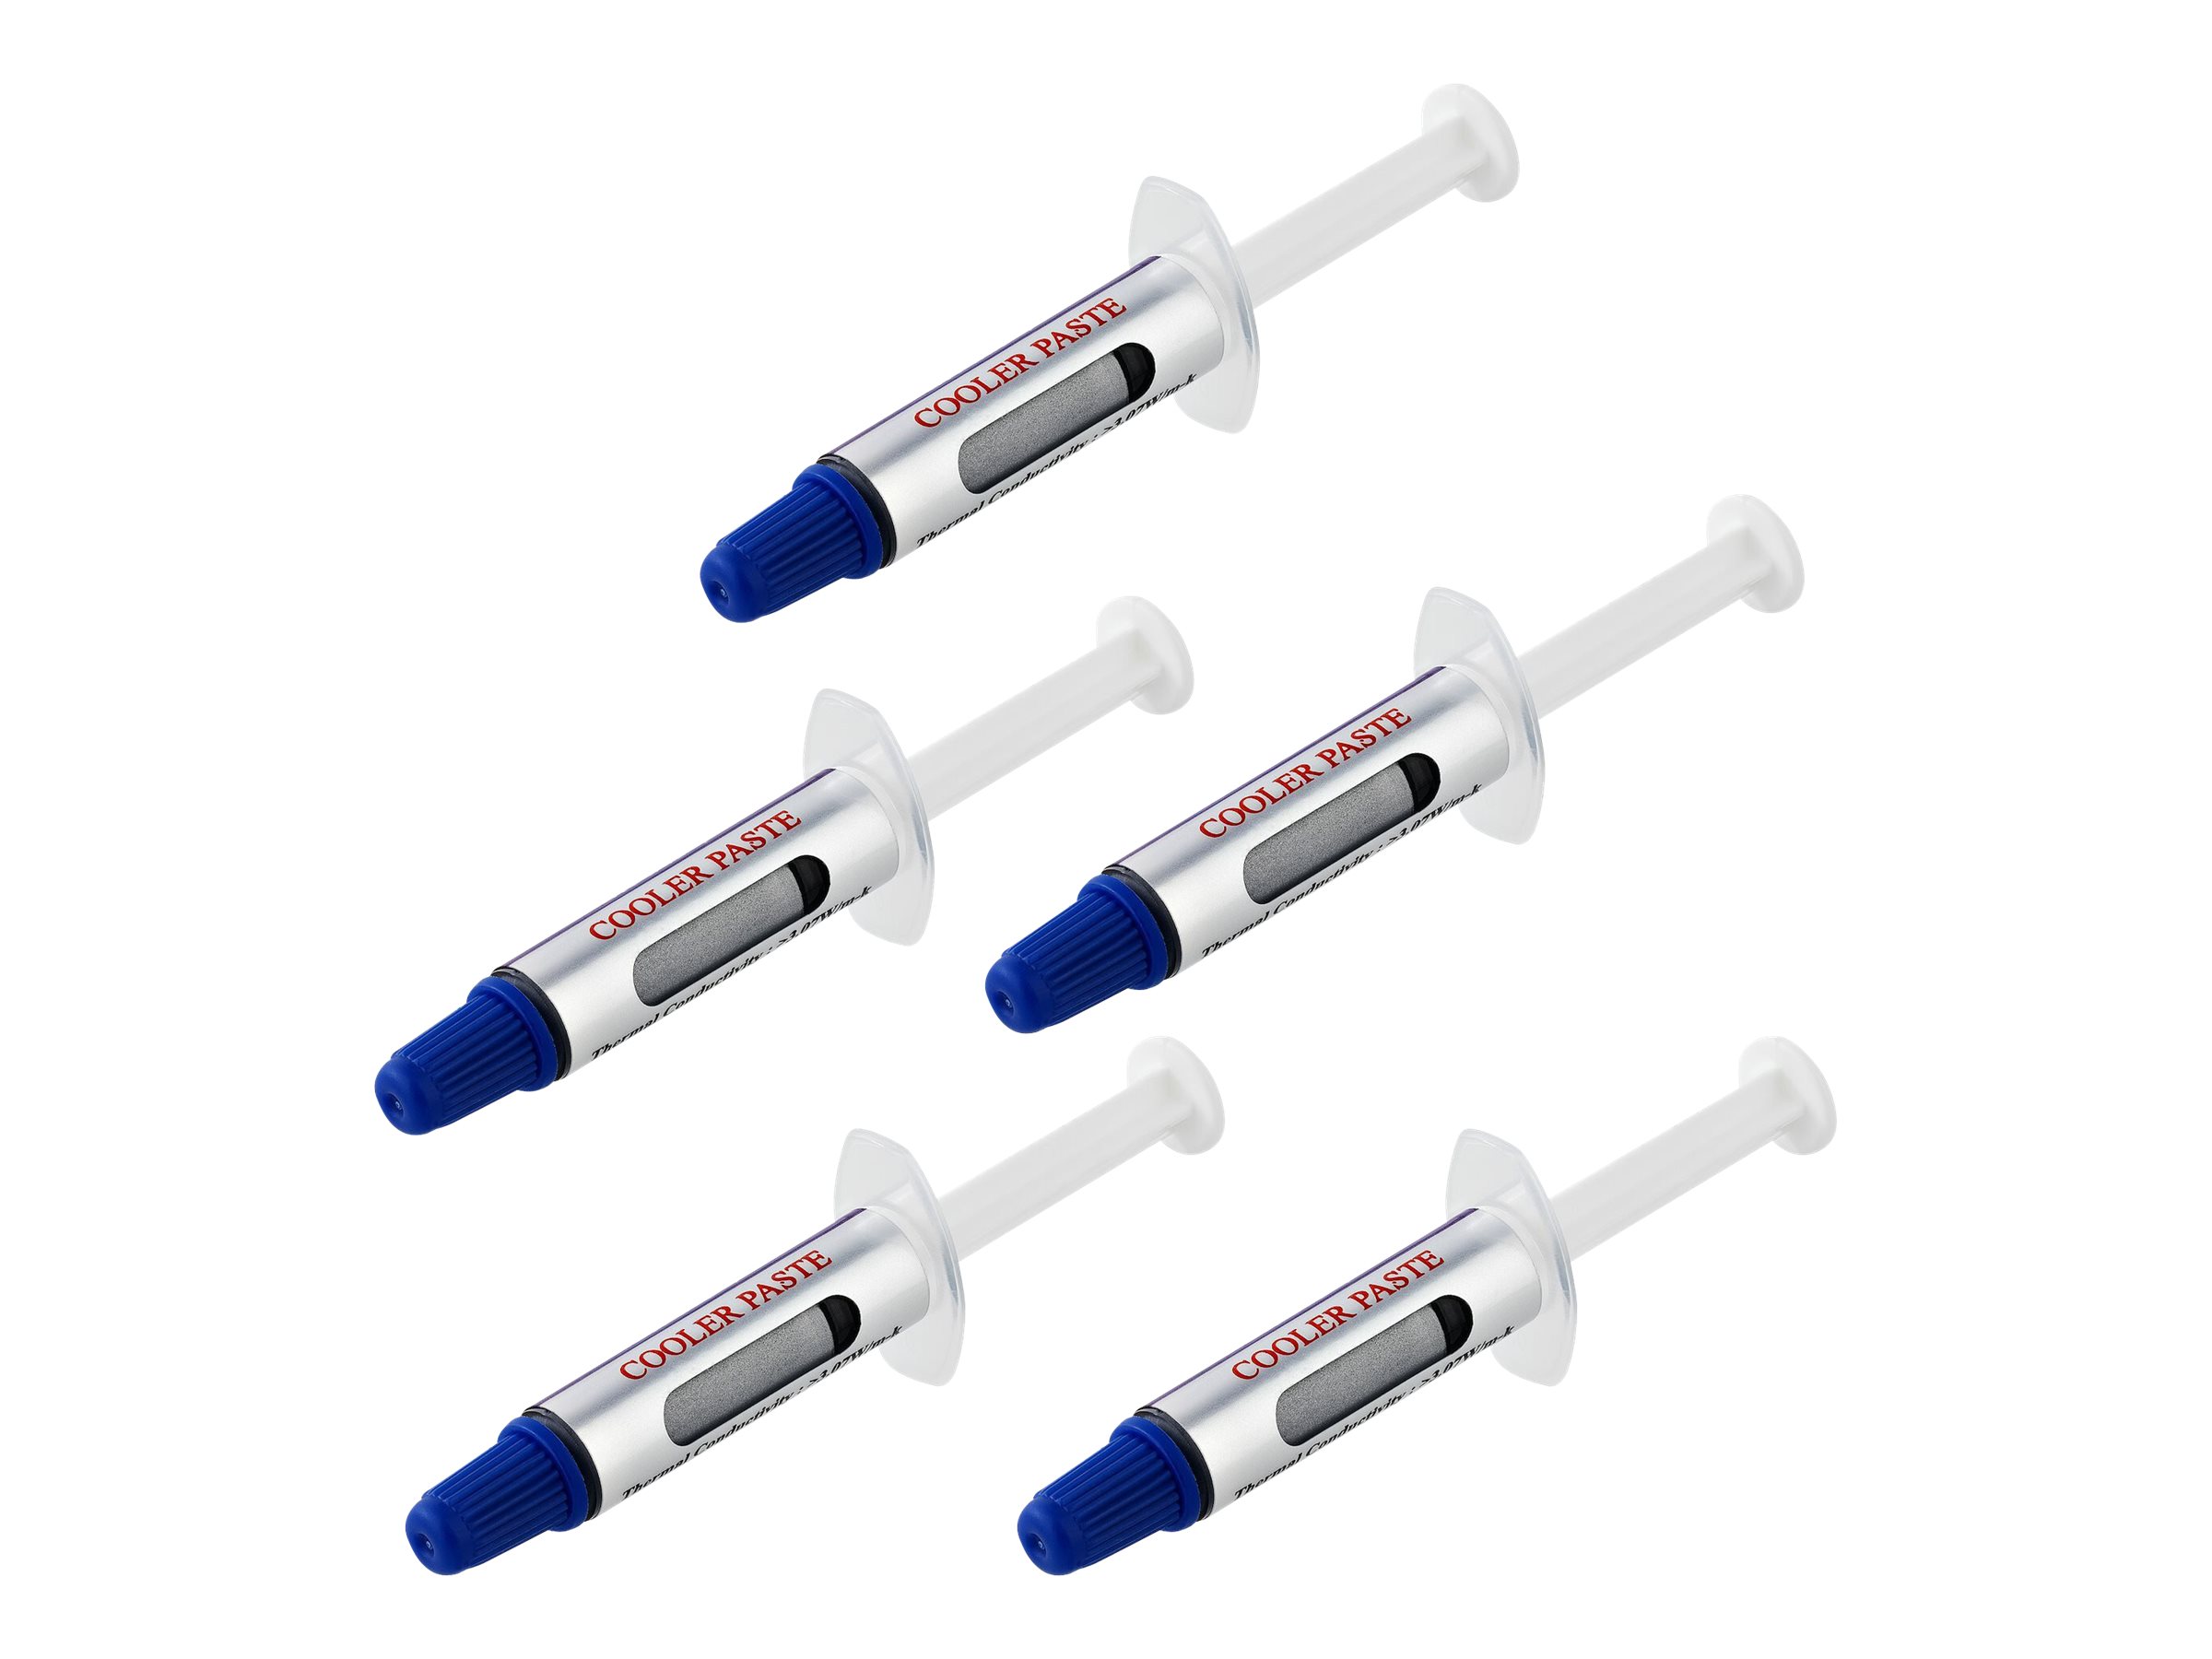 StarTech.com Thermal Paste, High Performance Thermal Paste, Pack of 5 Re-sealable Syringes (1.5g / each), Metal Oxide Heat Sink Compound, CPU Thermal Paste, Thermal Glue, RoHS / CE - GPU Grease (SILV5-THERMAL-PASTE) - Wärmeleitpaste - High-Performan...